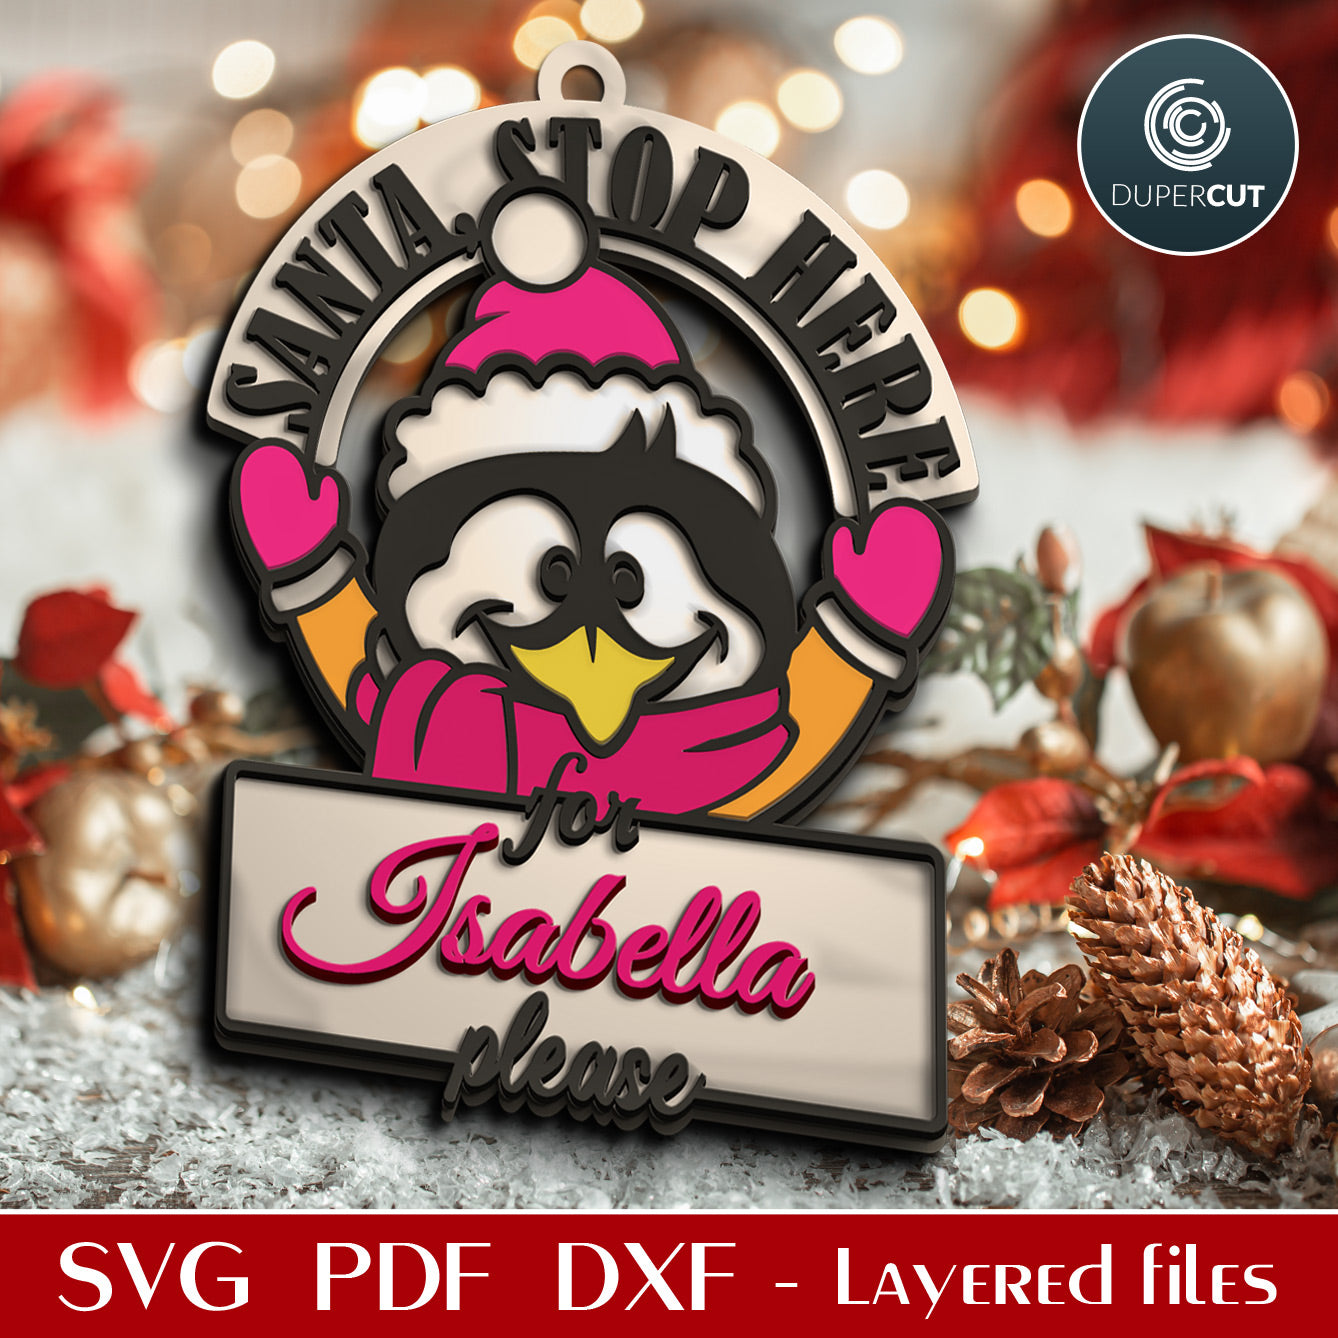 Santa please stop here for - Christmas door hanger SVG, DXF layered cutting files for laser machines, Glowforge, Cricut, Silhouette, CNC plasma by DuperCut